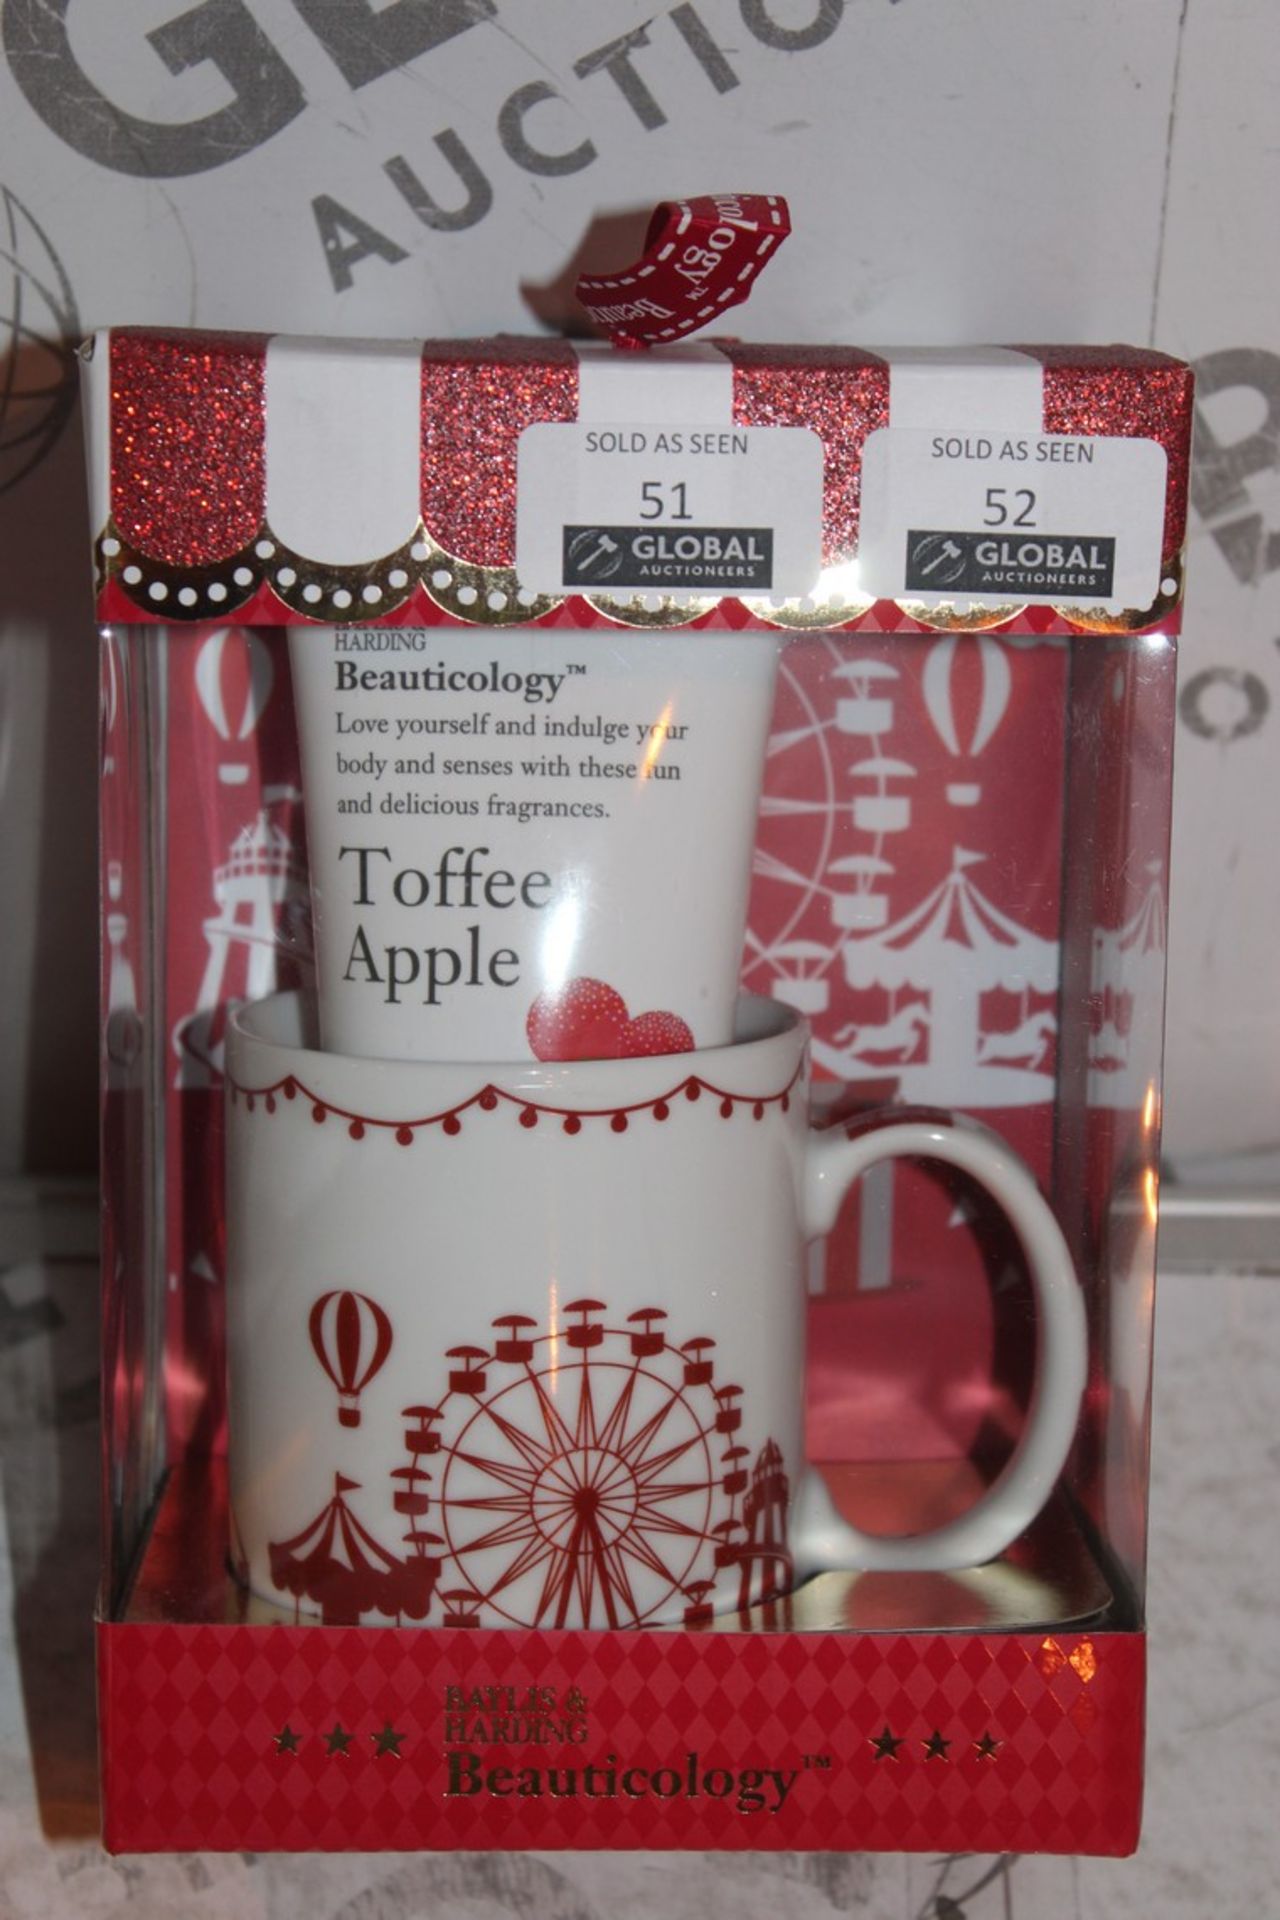 Lot to Contain 2 Boxed Brand New Bayliss and Harding Beauticology Carnival Mug Sets to Include